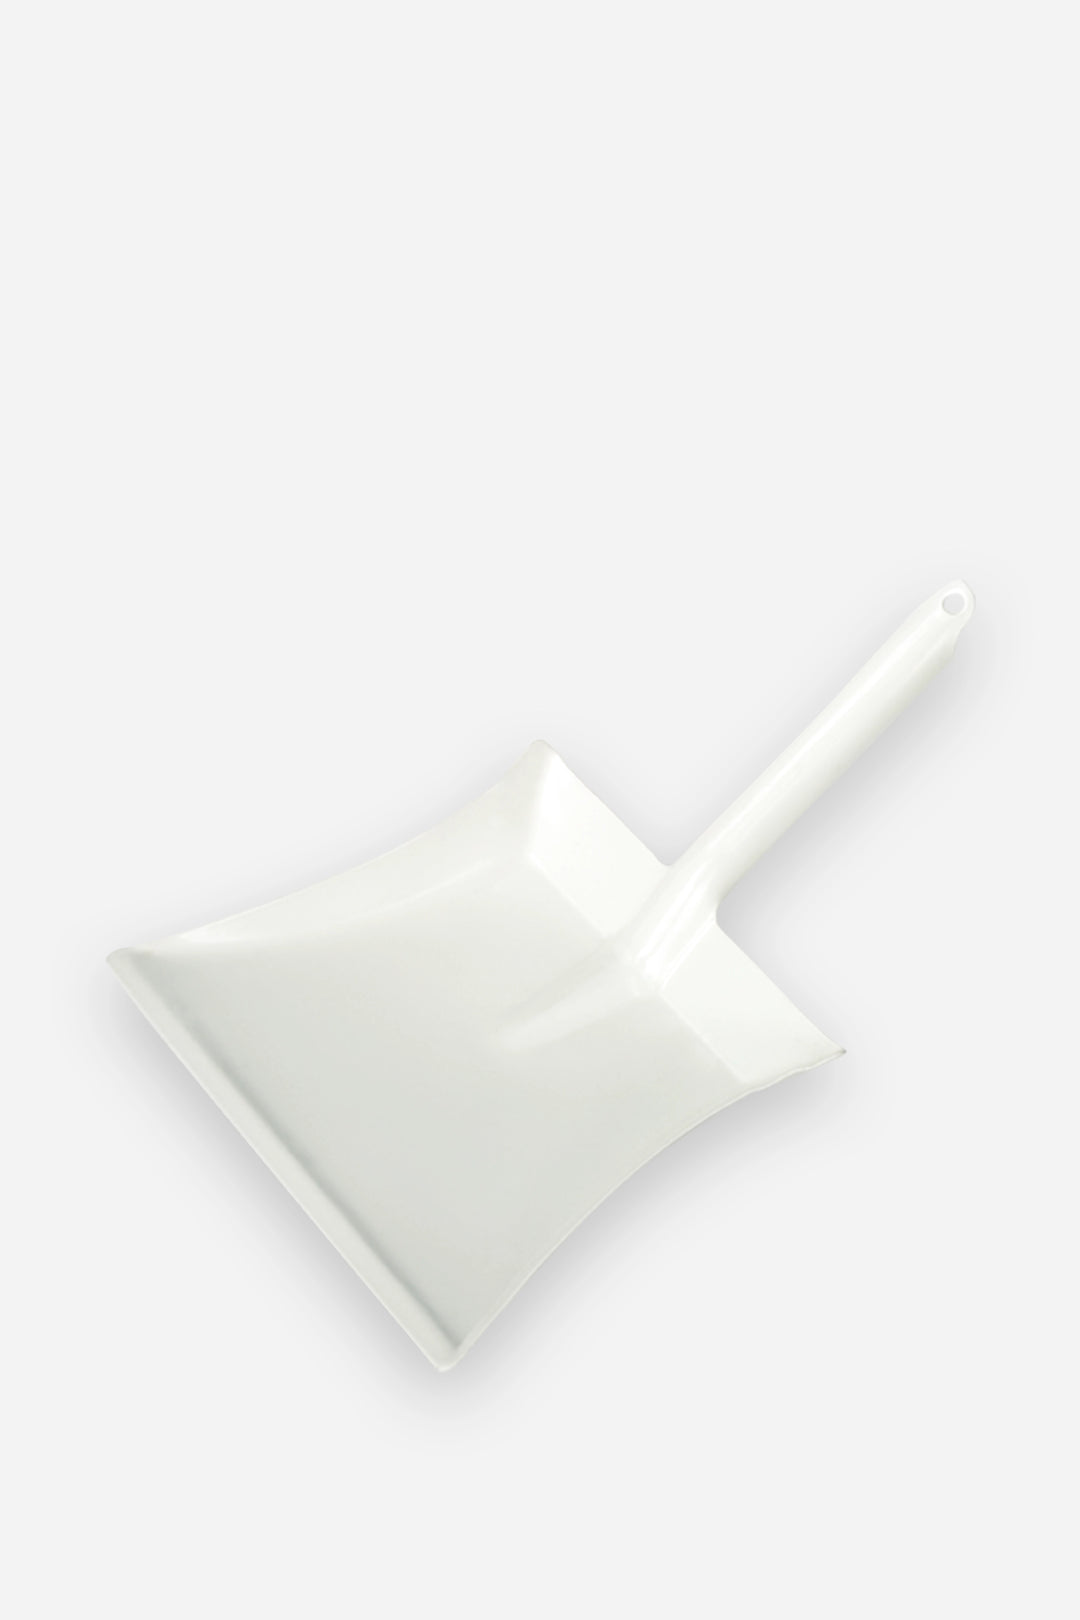 Childs Dust Pan / White